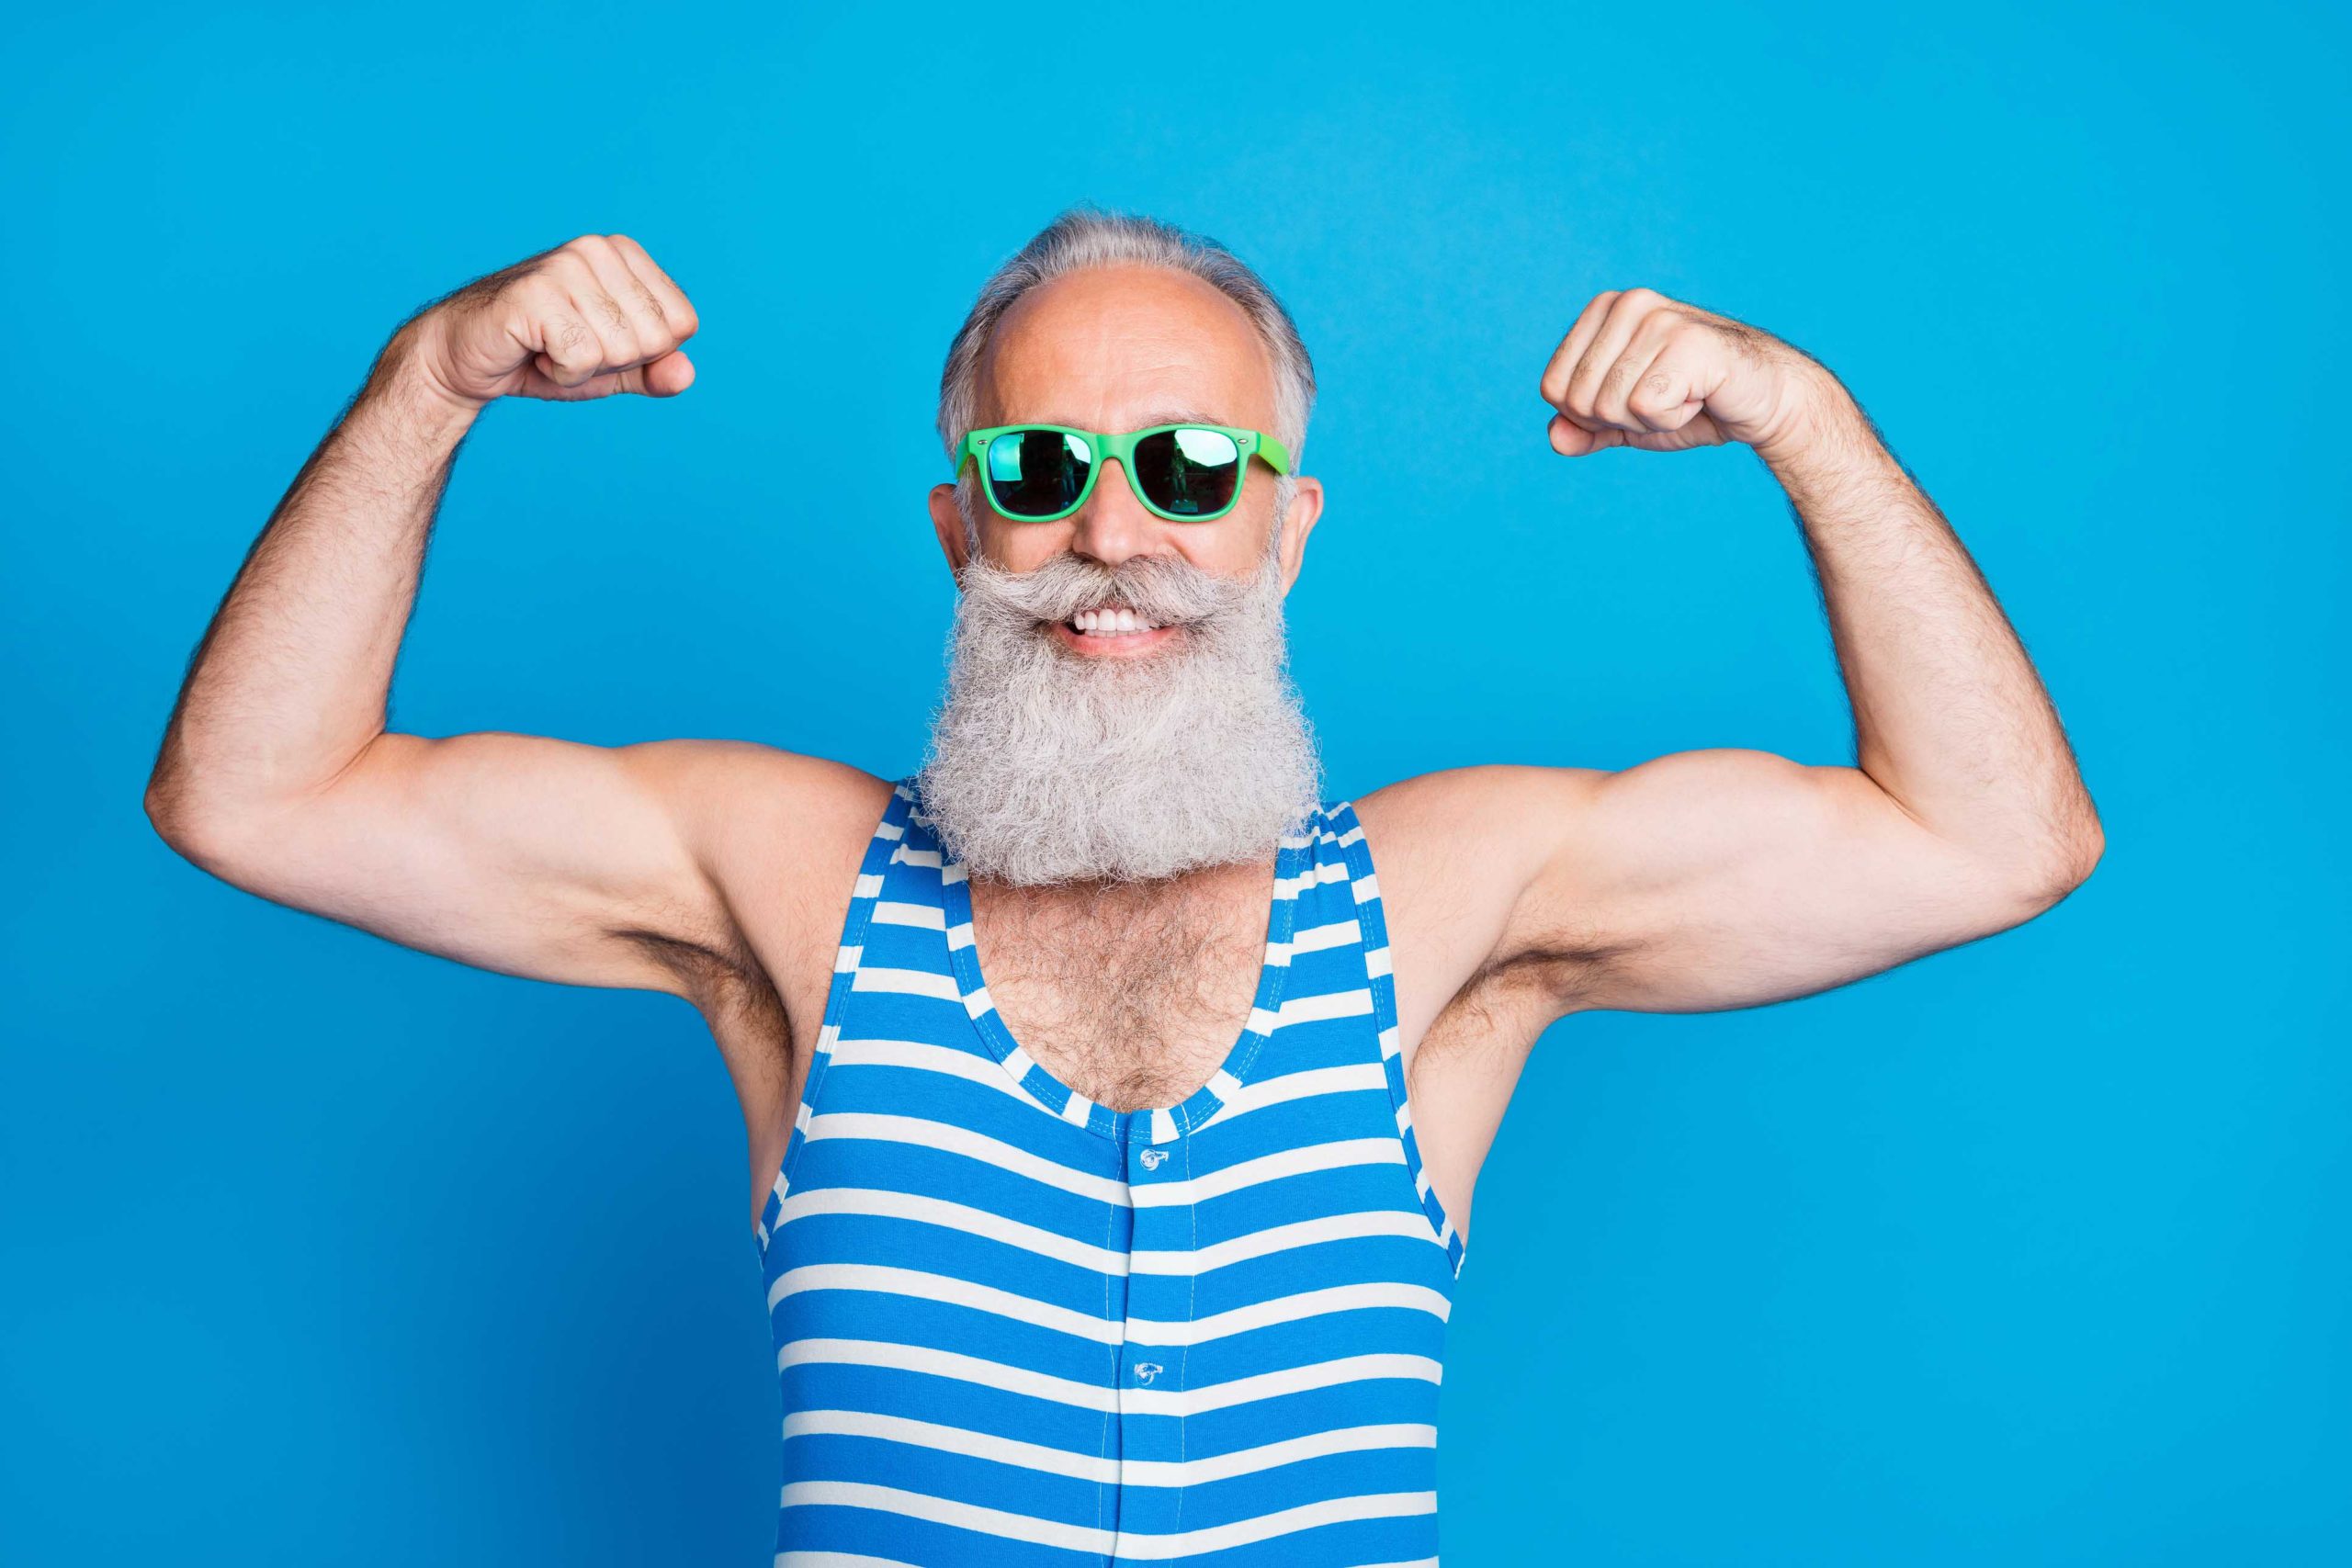 Fit senior man wearing goggles and a swimsuit flexing his muscles to represent strength and healthy physical aging